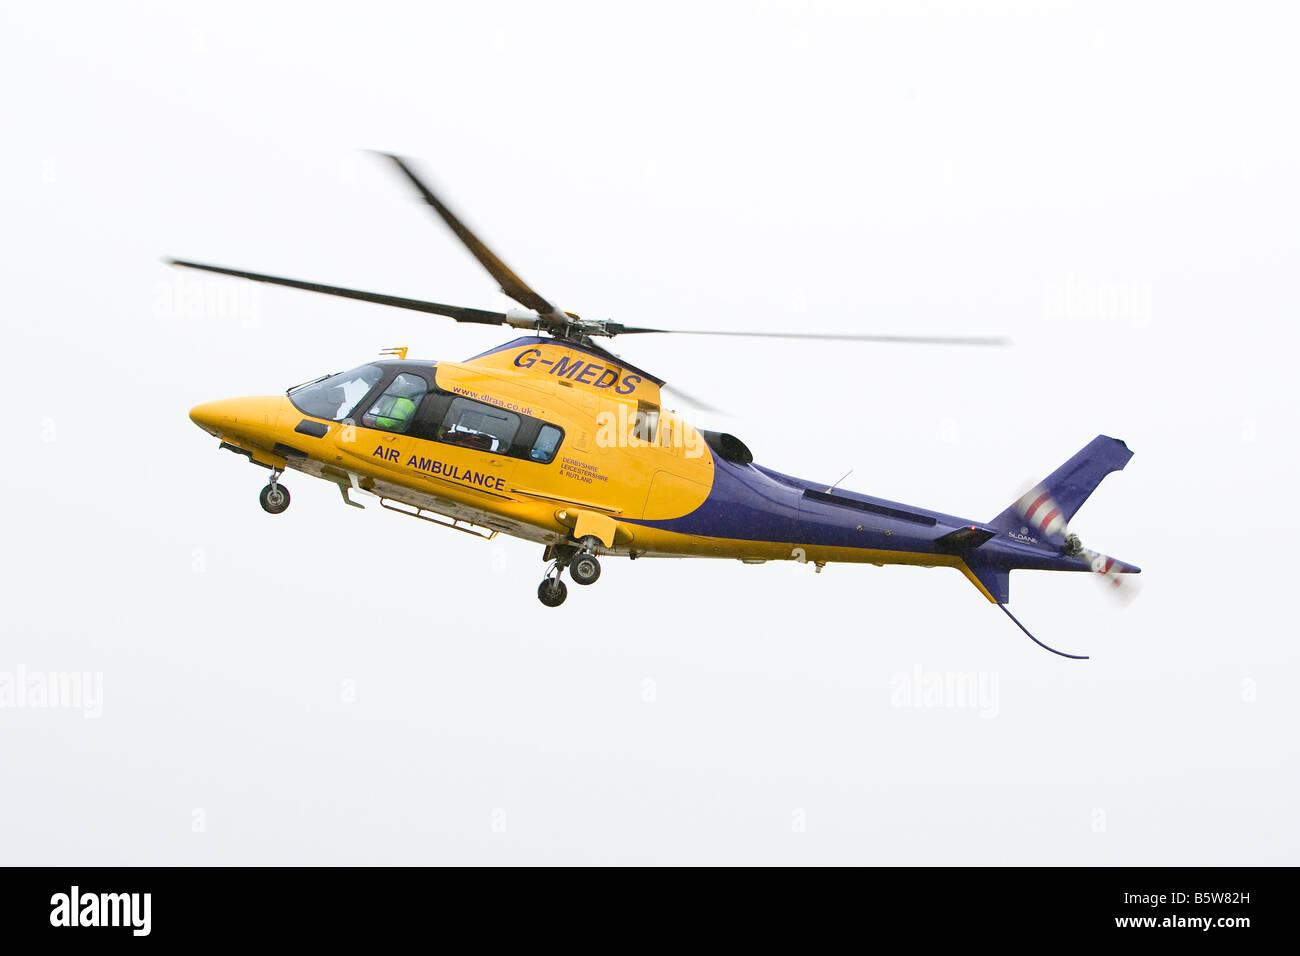 Derbyshire leicestershire and Rutland Agusta 109 air ambulance helicopter Stock Photo